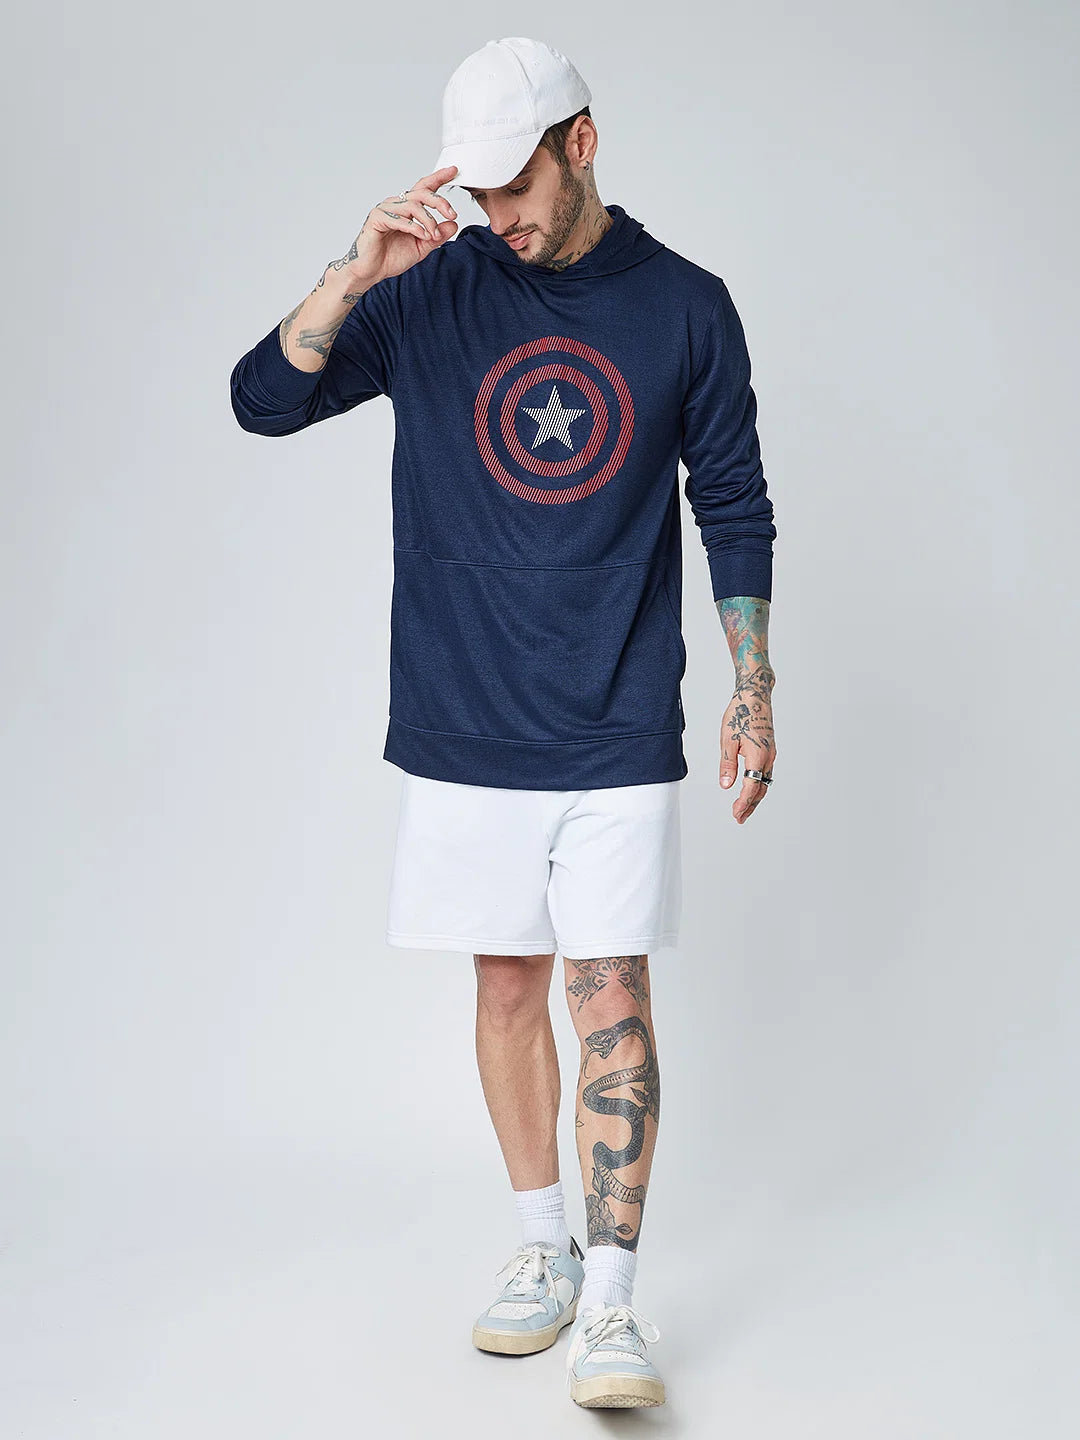 Marvel Captain America All Weather Hoodies (Limited Edition) UK version